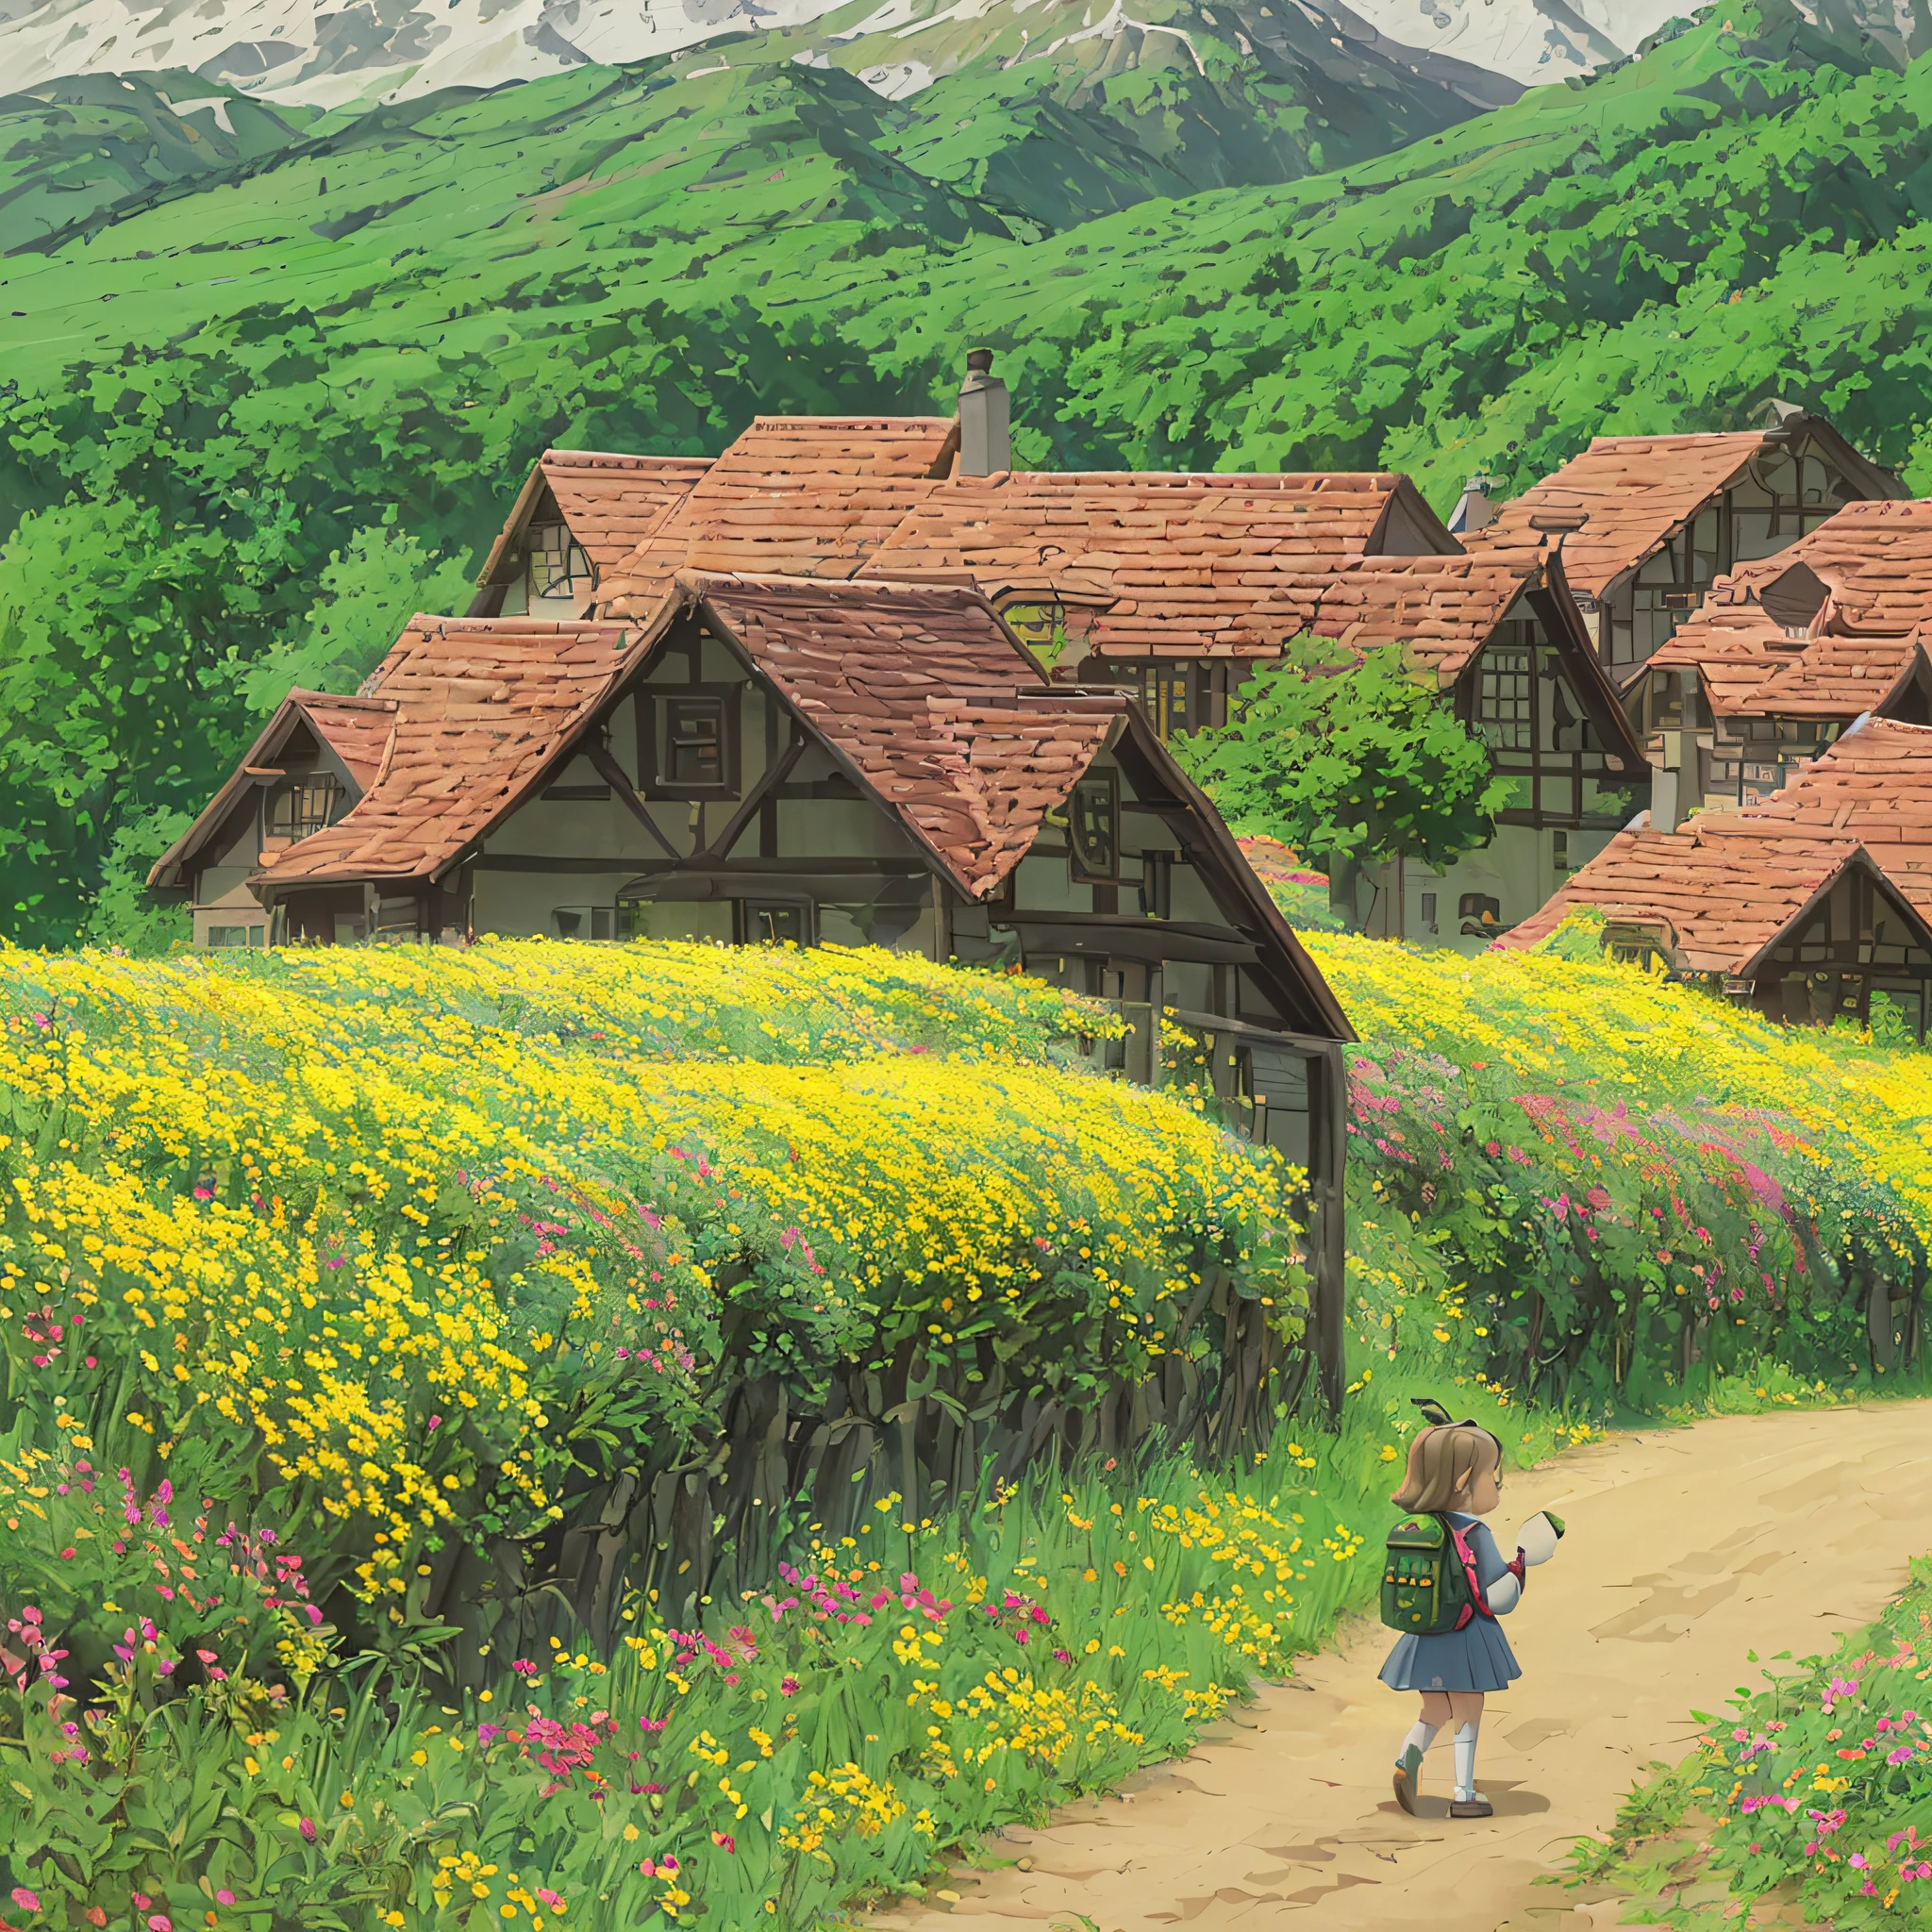 A very charming  with a backpack and her cute little dog enjoying a cute spring excursion surrounded by beautiful yellow flowers and nature. Disney style with highly detailed facial features and cartoon-style visuals